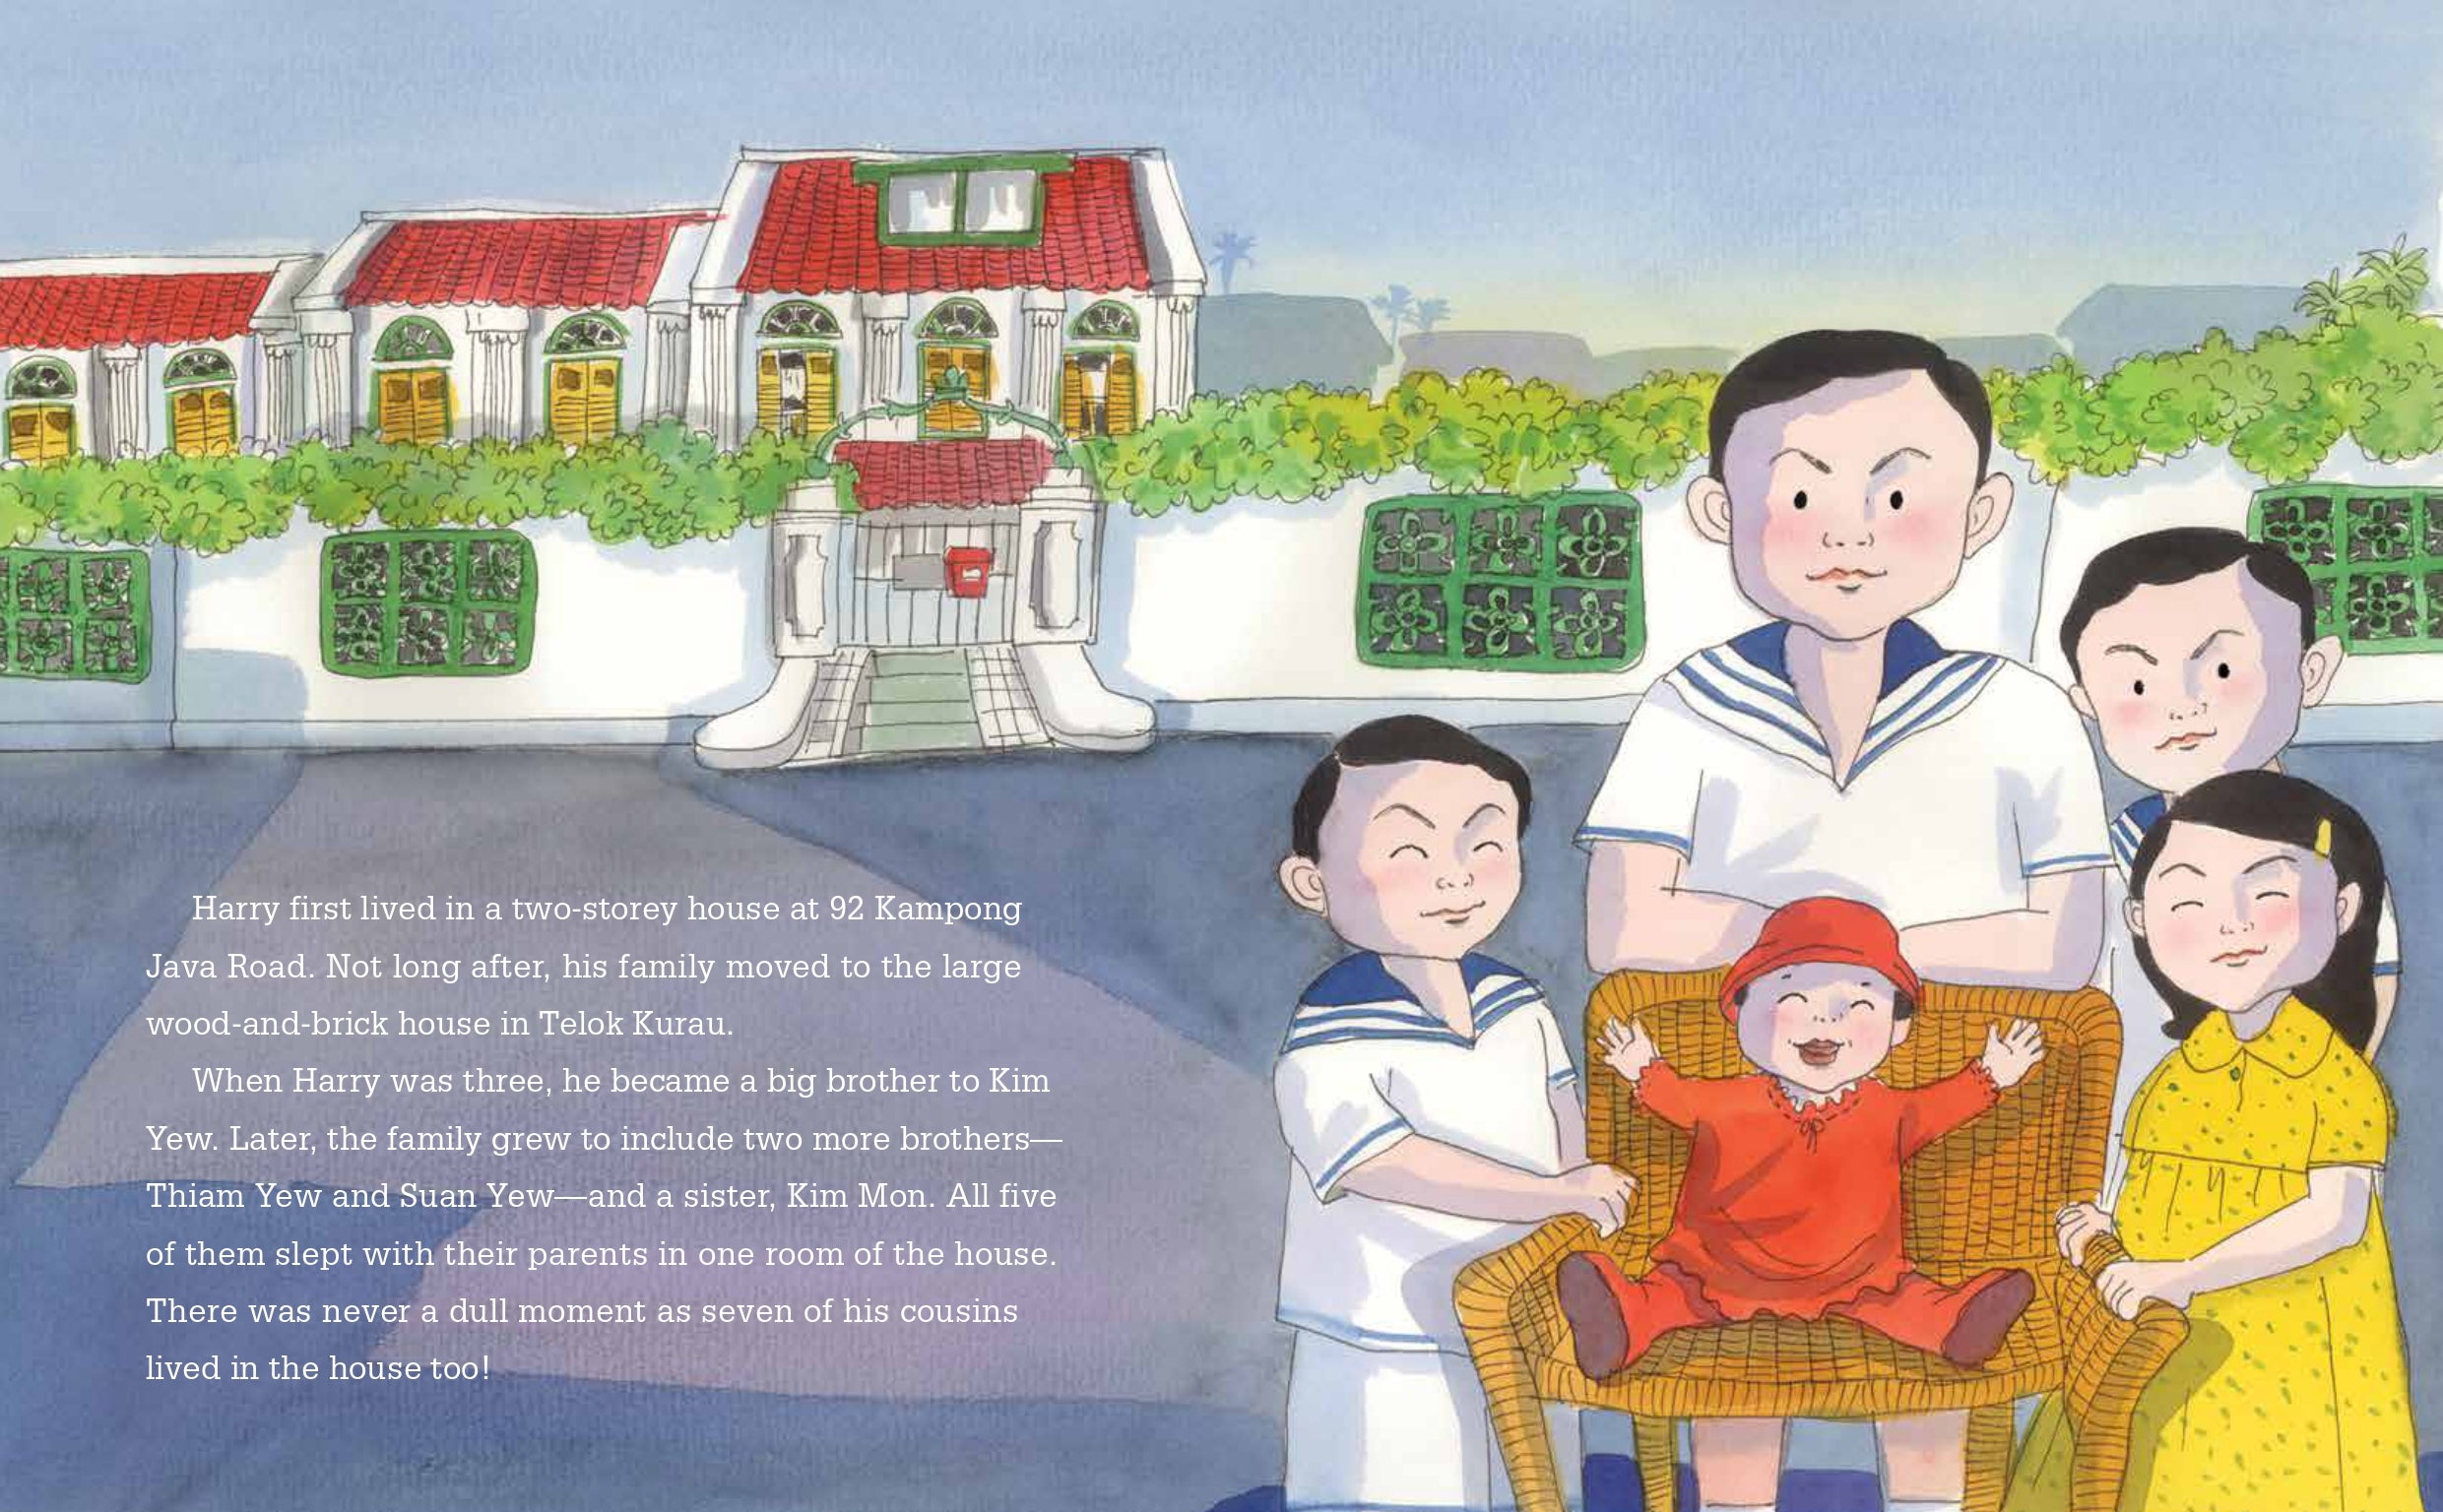 A Boy Named Harry: The Childhood of Lee Kuan Yew (book 1)